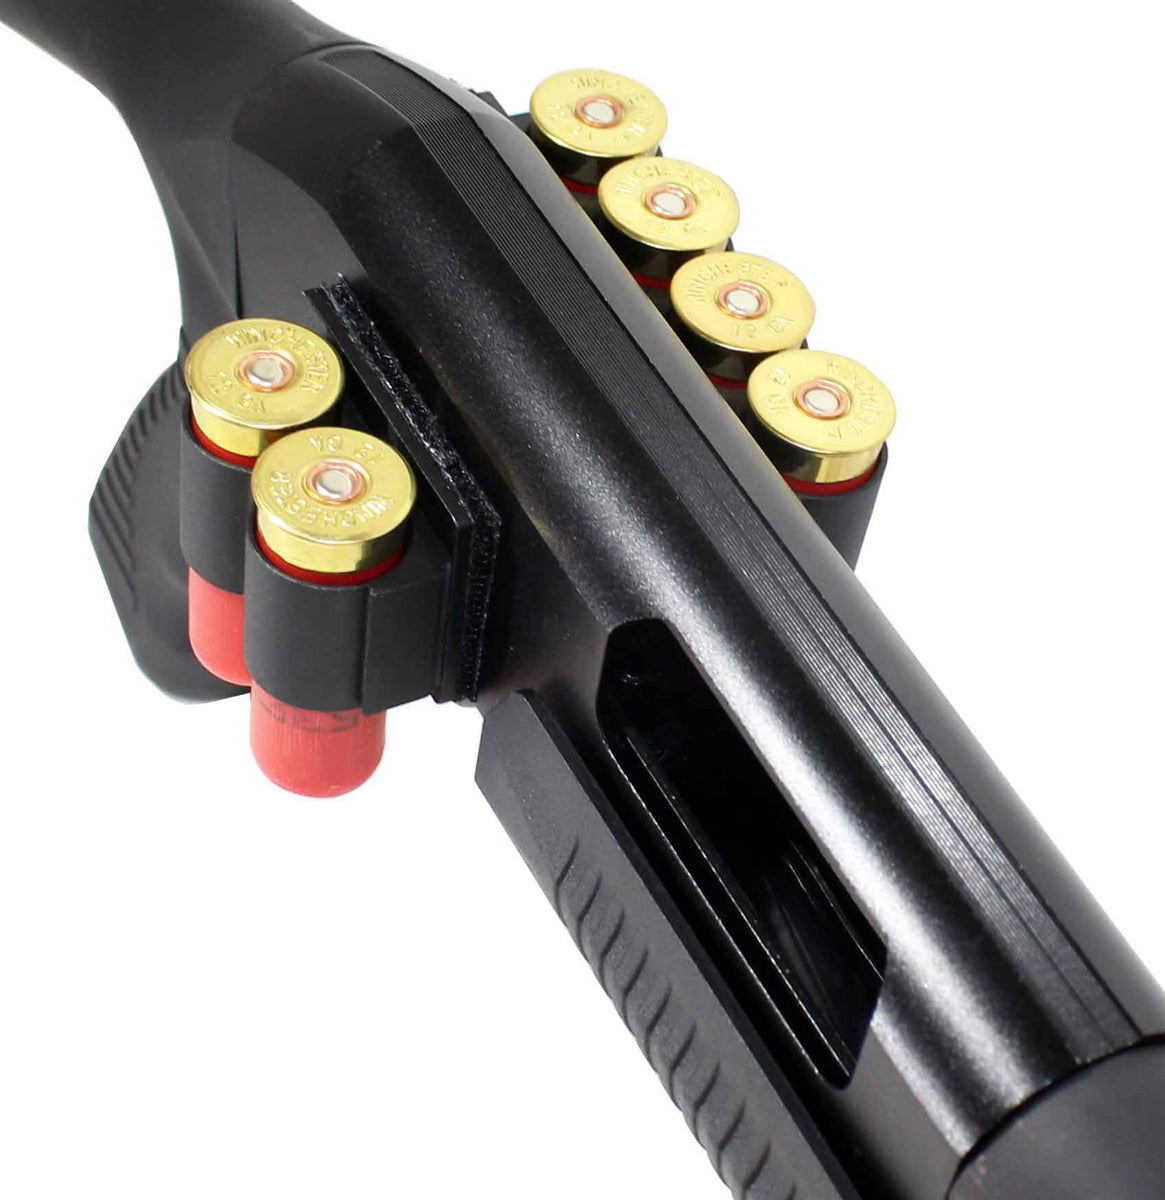 savage arms 320 model shell carrier.